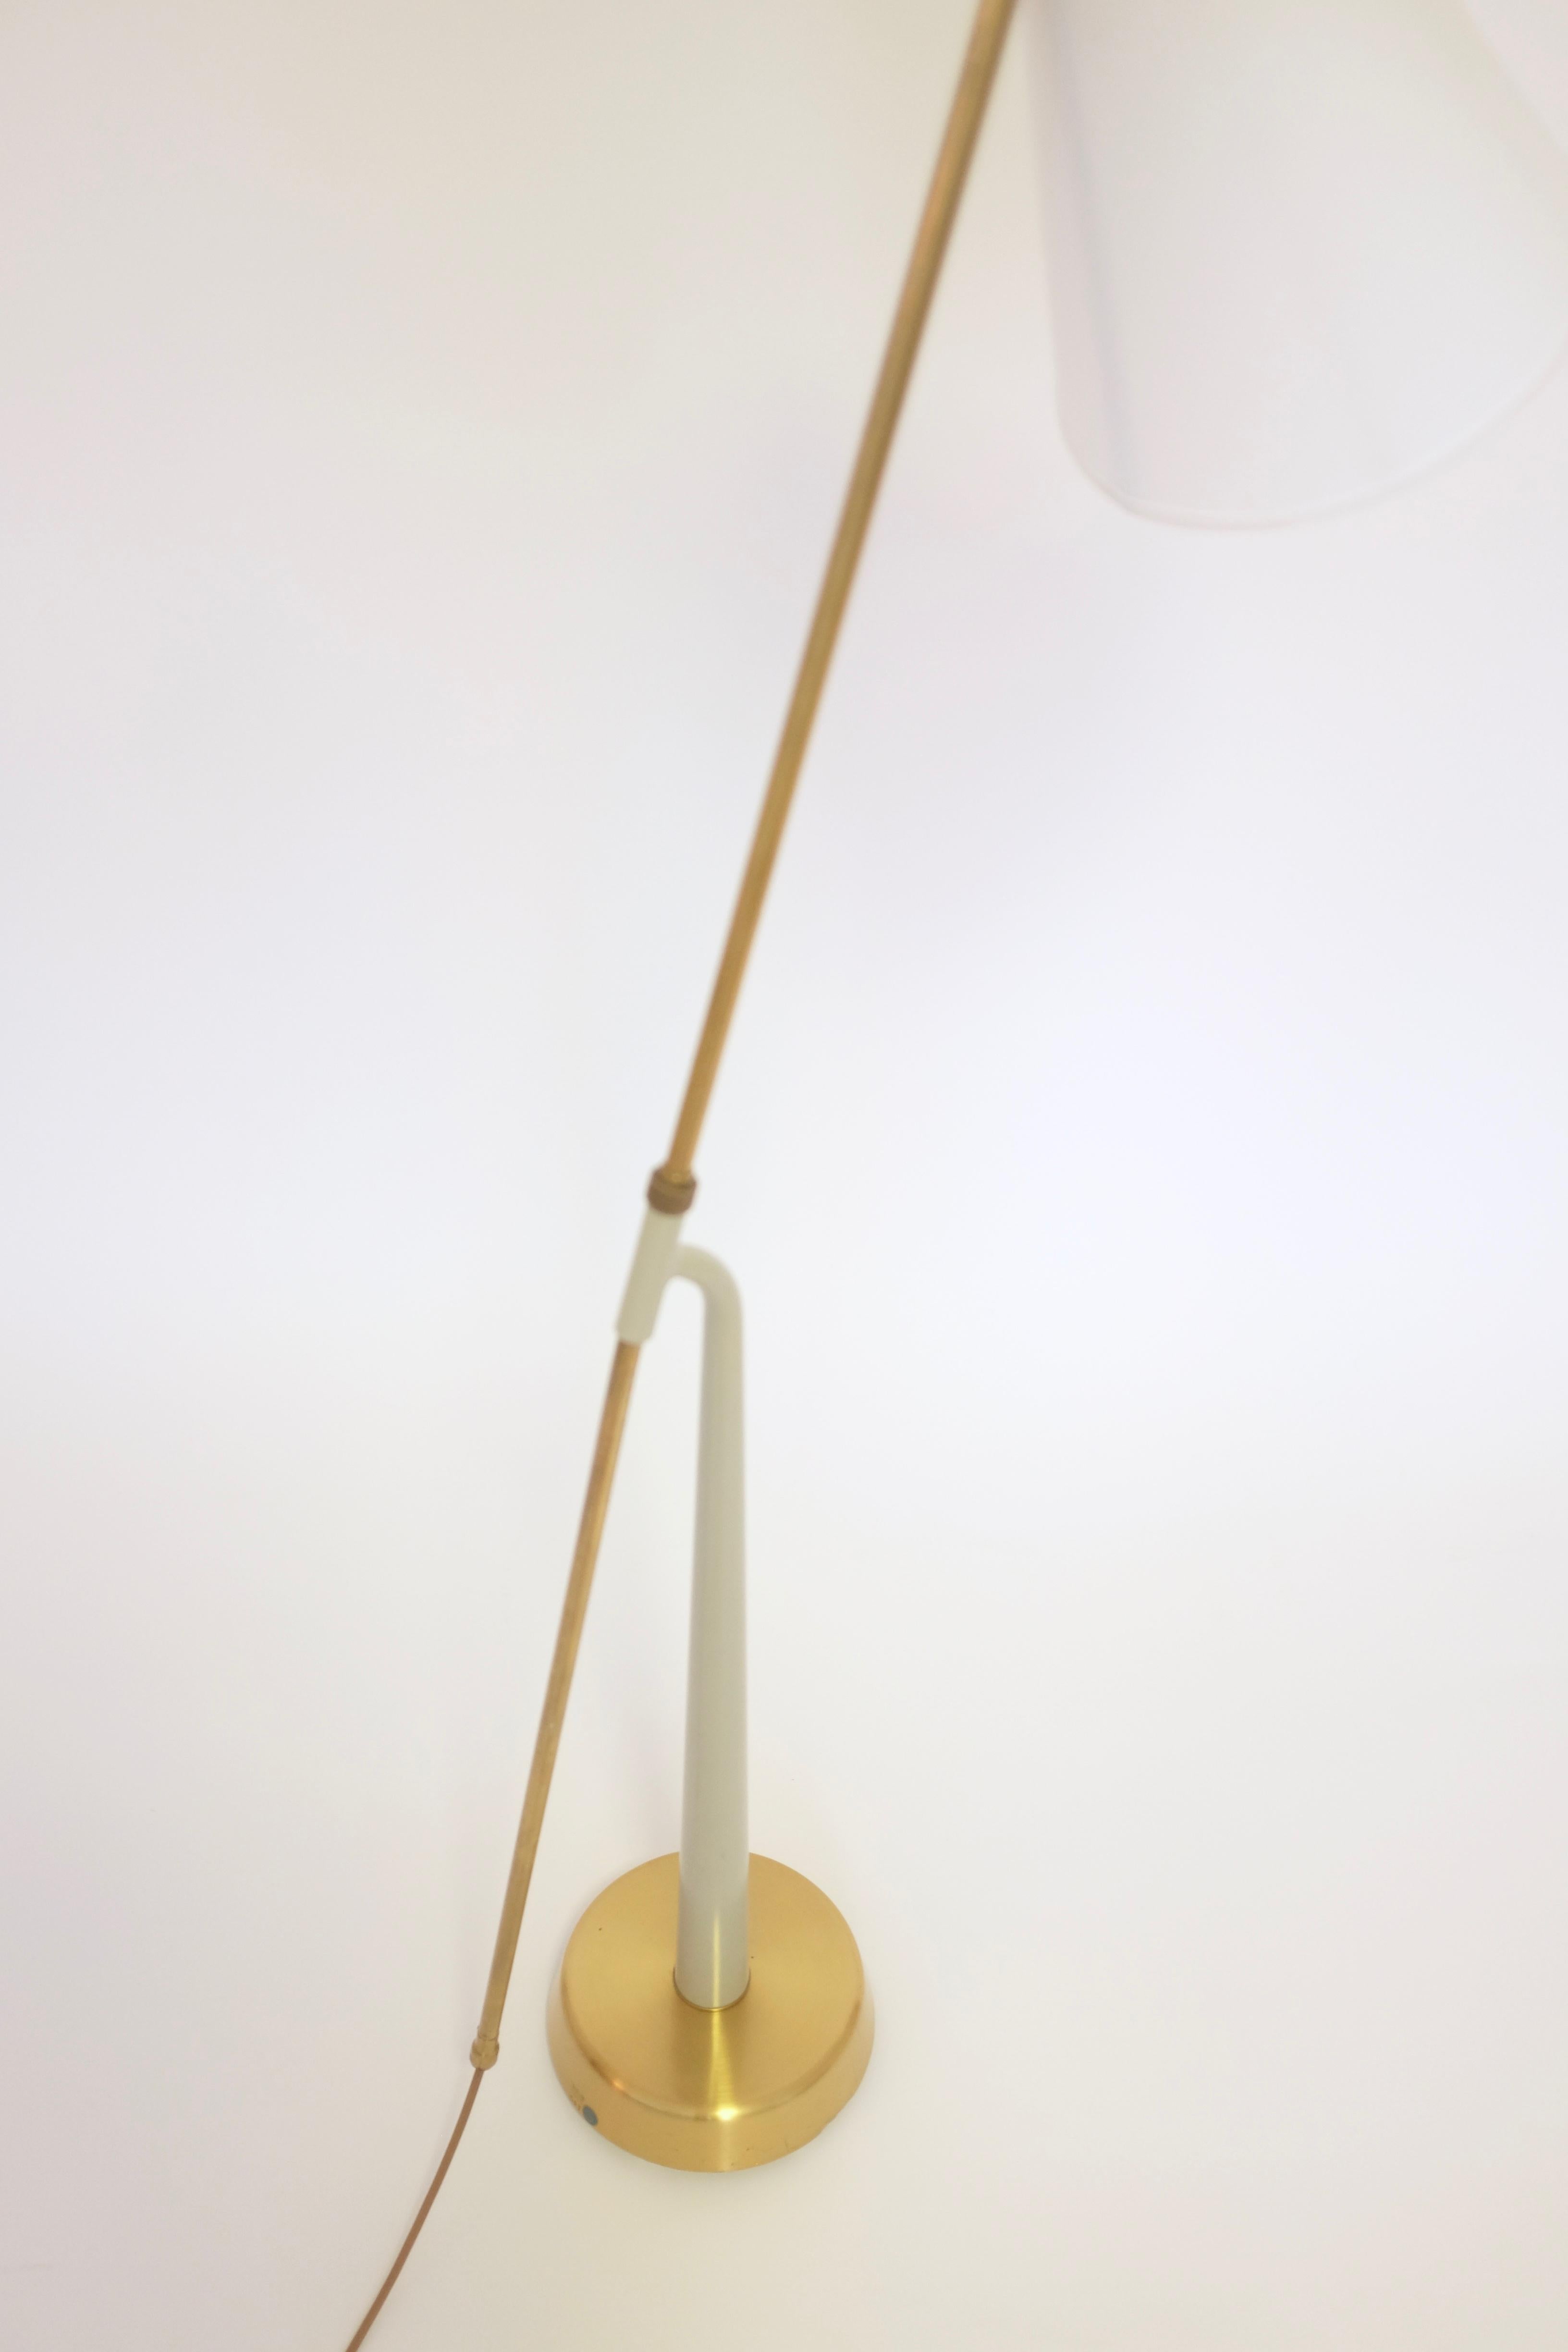 Beautiful 1940's Floor lamp model 541 by Hans Bergström for Ateljé Lyktan. Grey metal frame with arm and base in brass. Both frame and base in great condition with only a couple of small scratches. New lampshade. 

Maker: Ateljé Lyktan

Country: